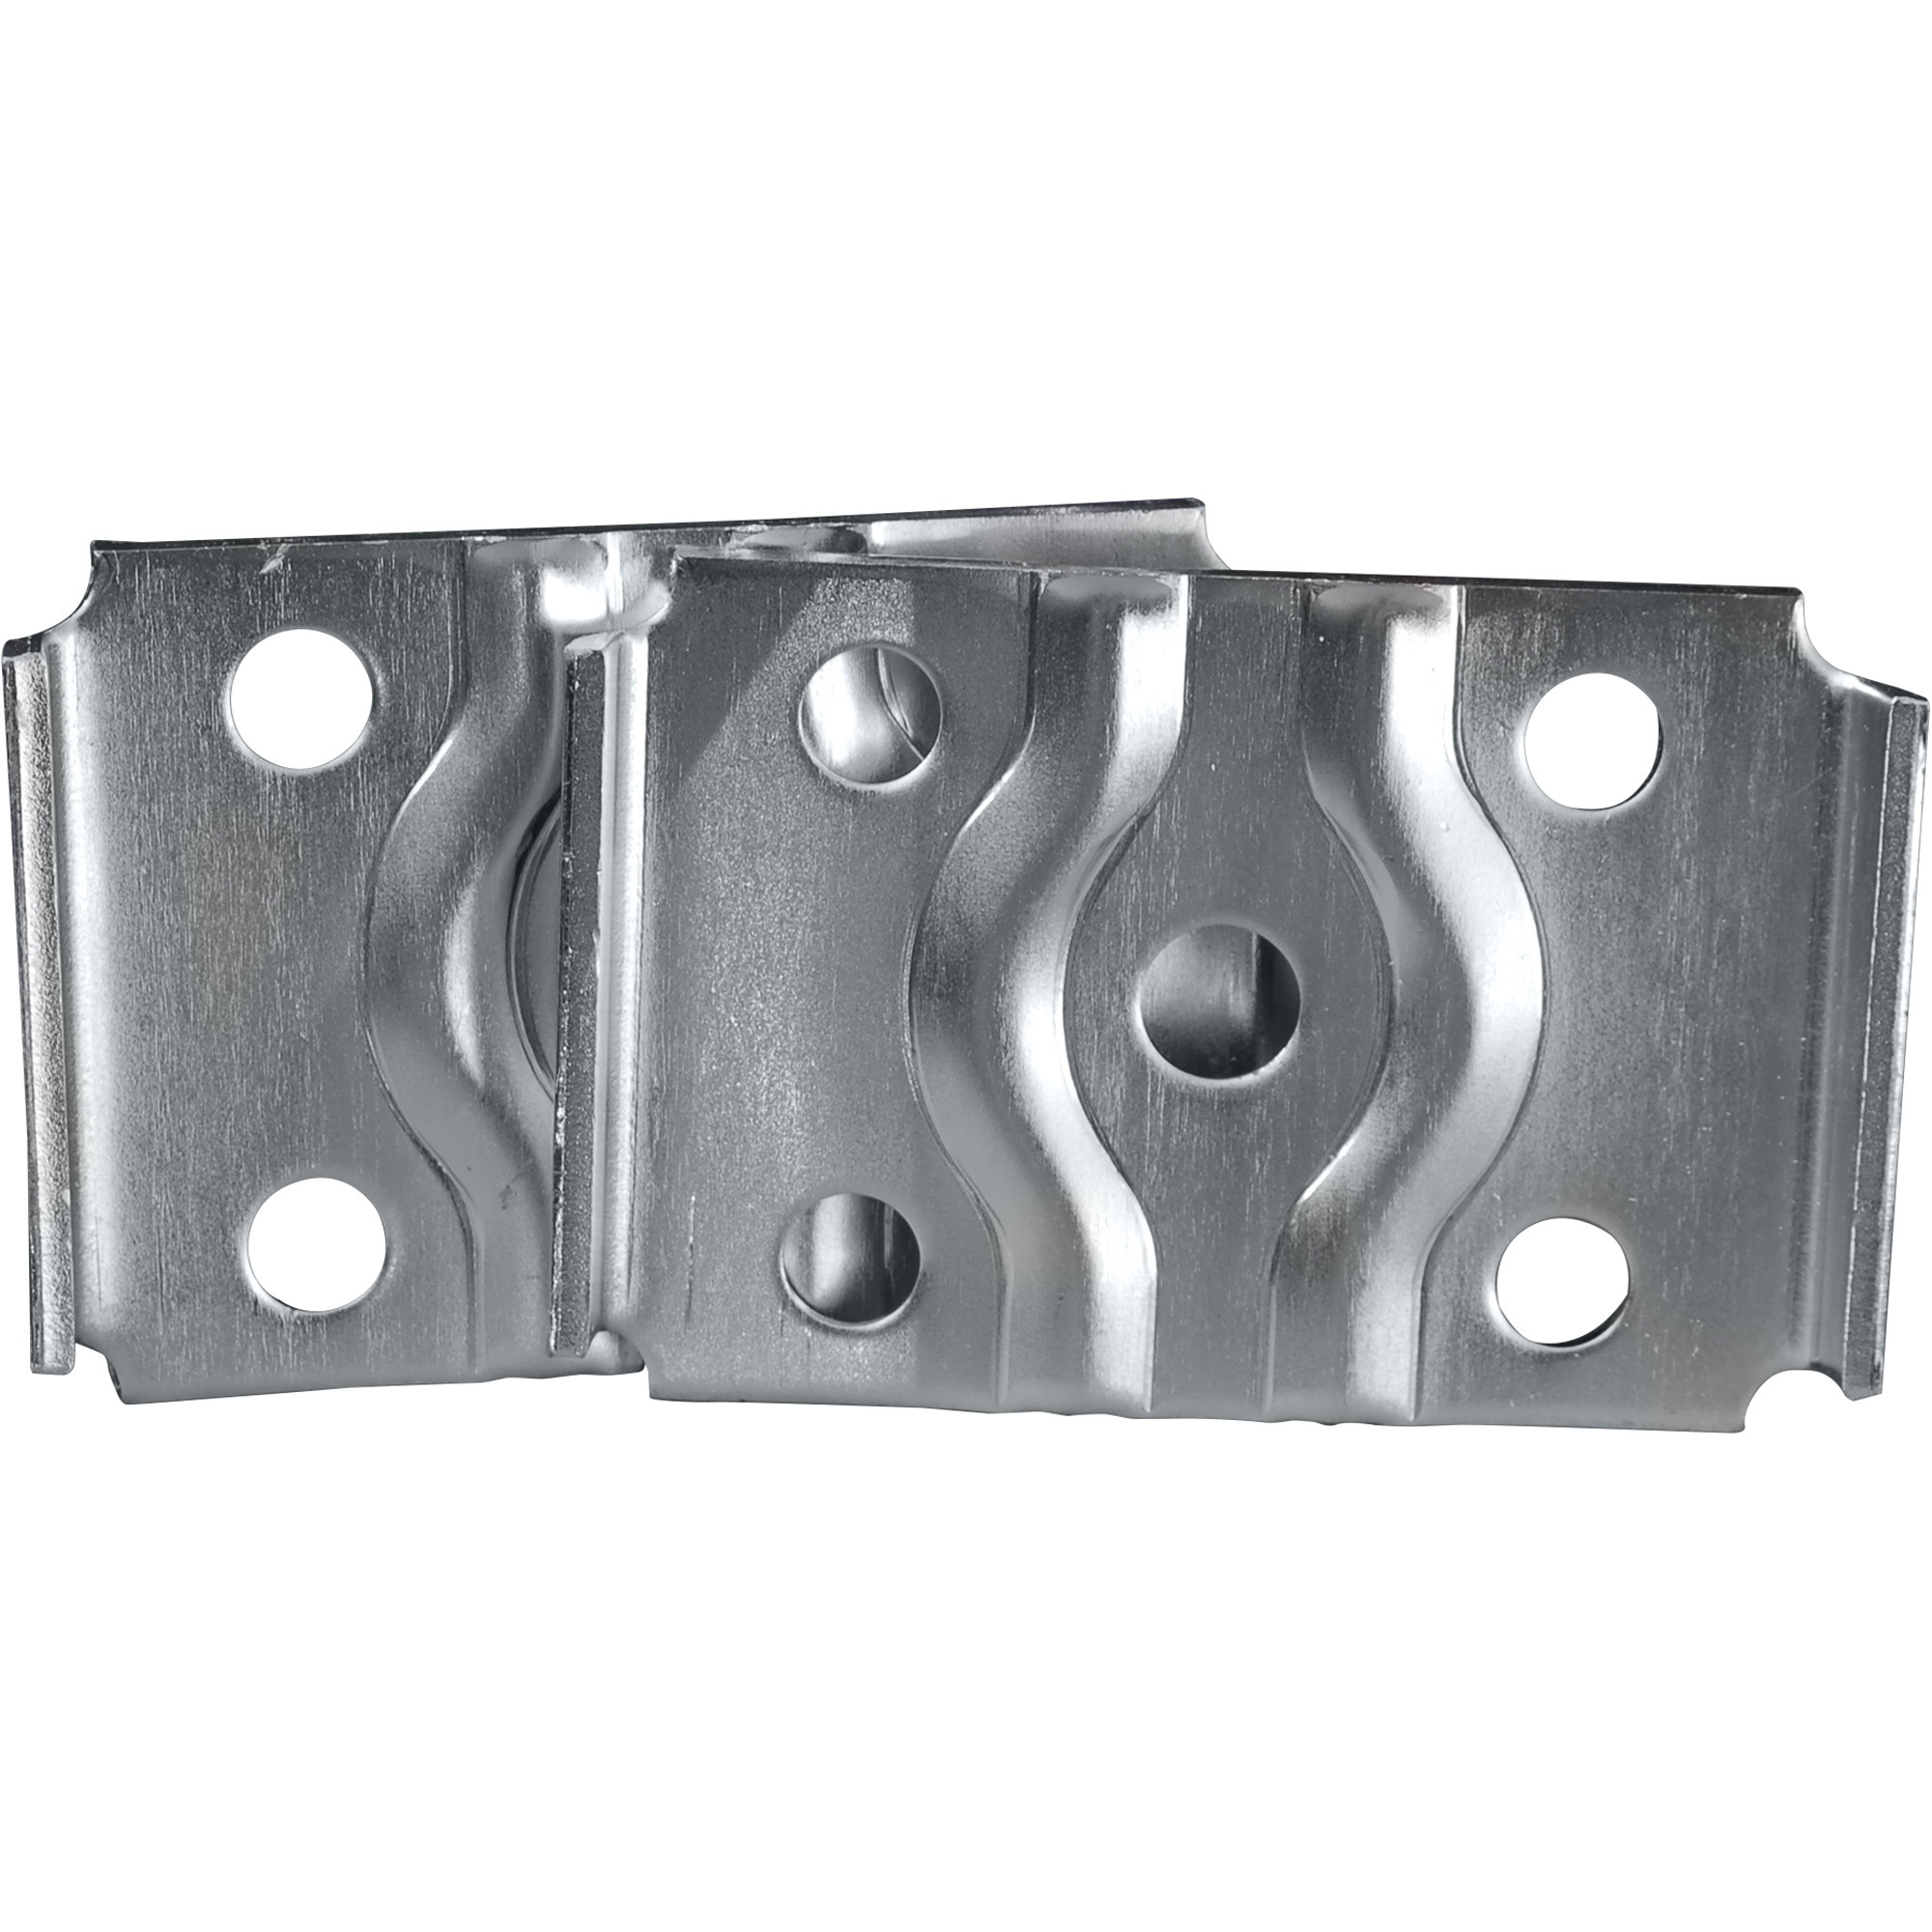 Ultra-Tow Spring Tie Plate for 3Inch Round Axle Tube